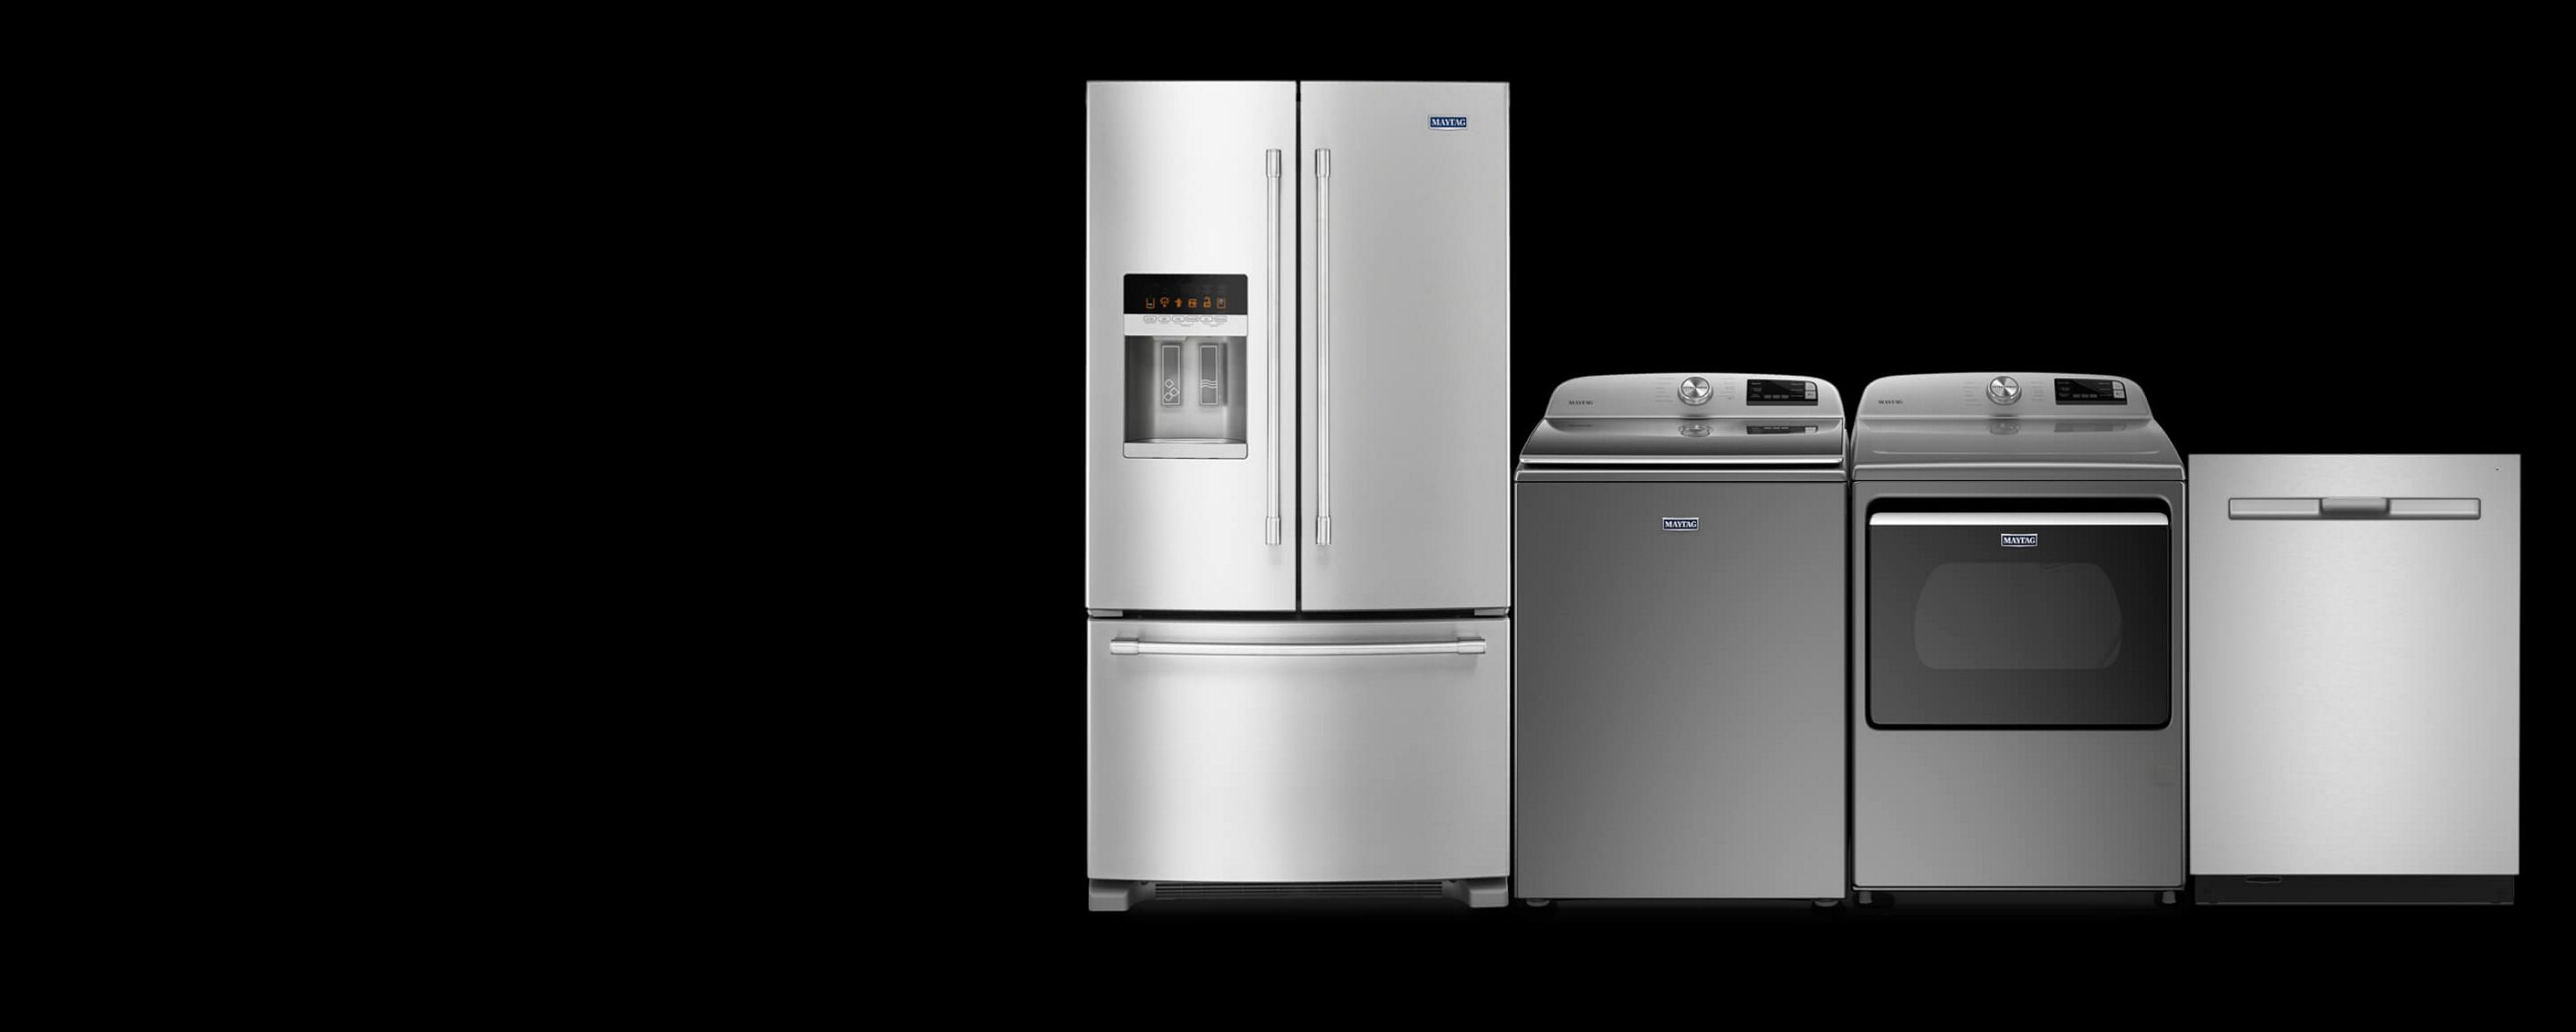 A Maytag® refrigerator, washer and dryer laundry pair and dishwasher.